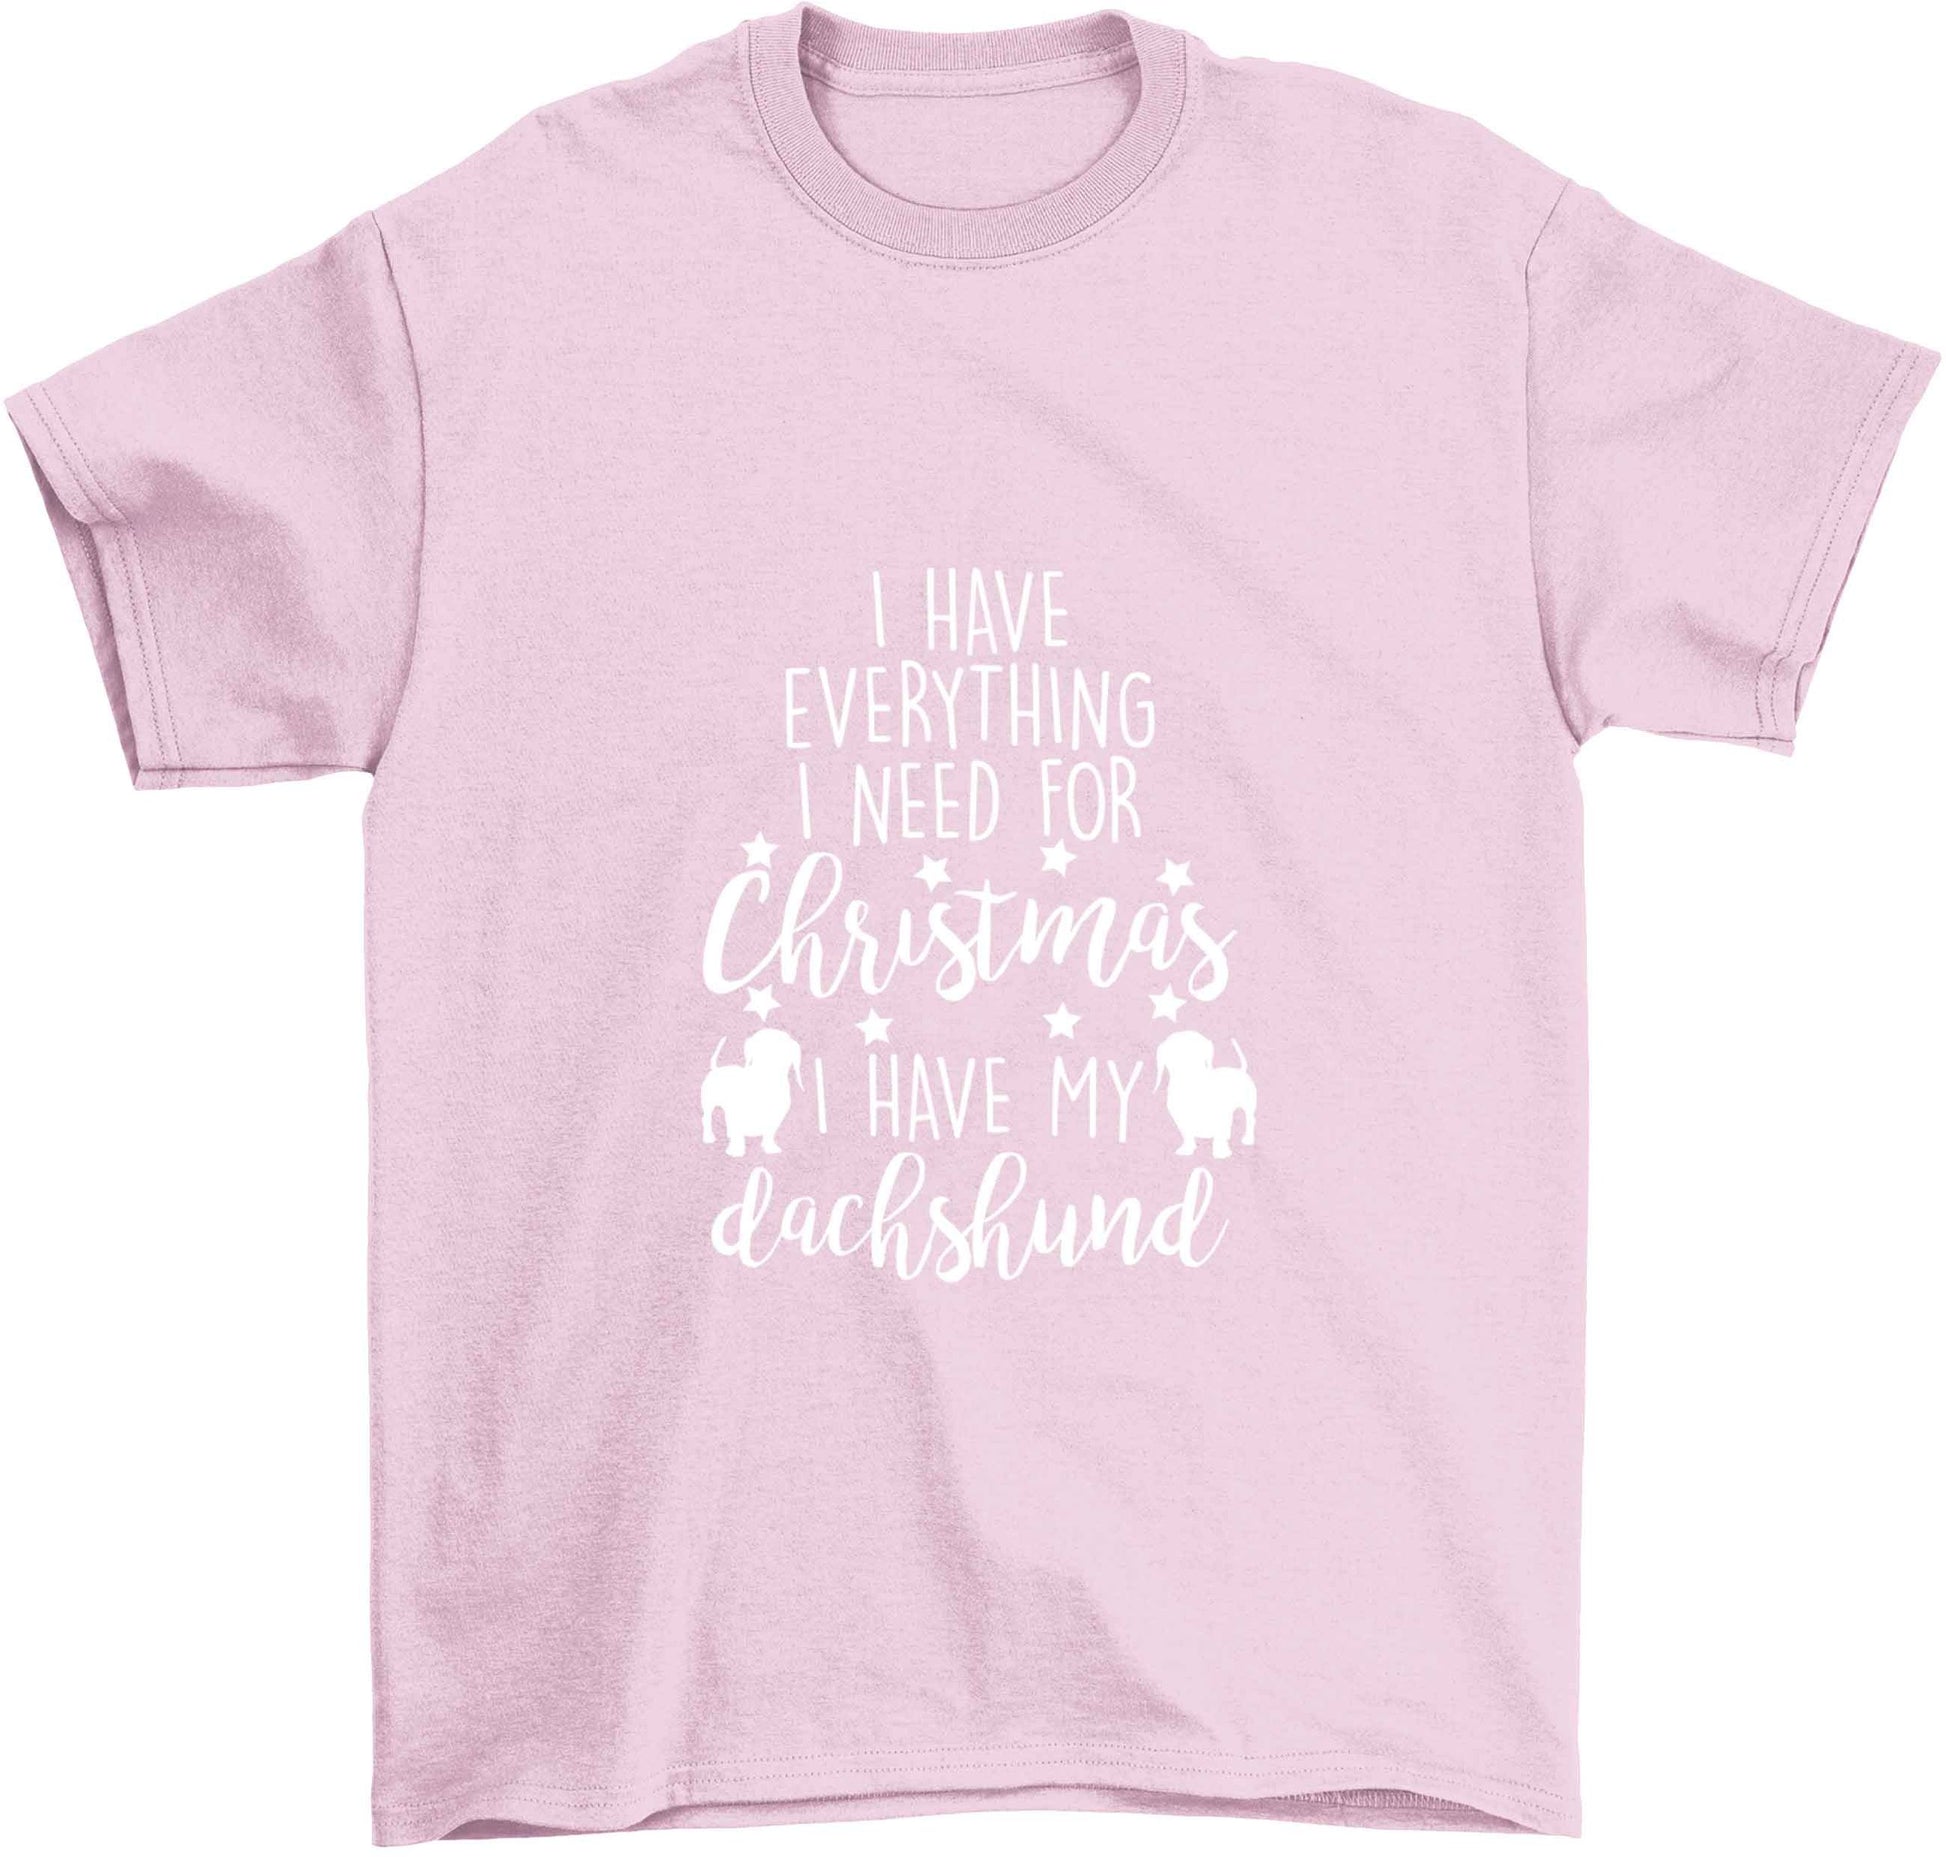 I have everything I need for Christmas I have my dachshund Children's light pink Tshirt 12-13 Years